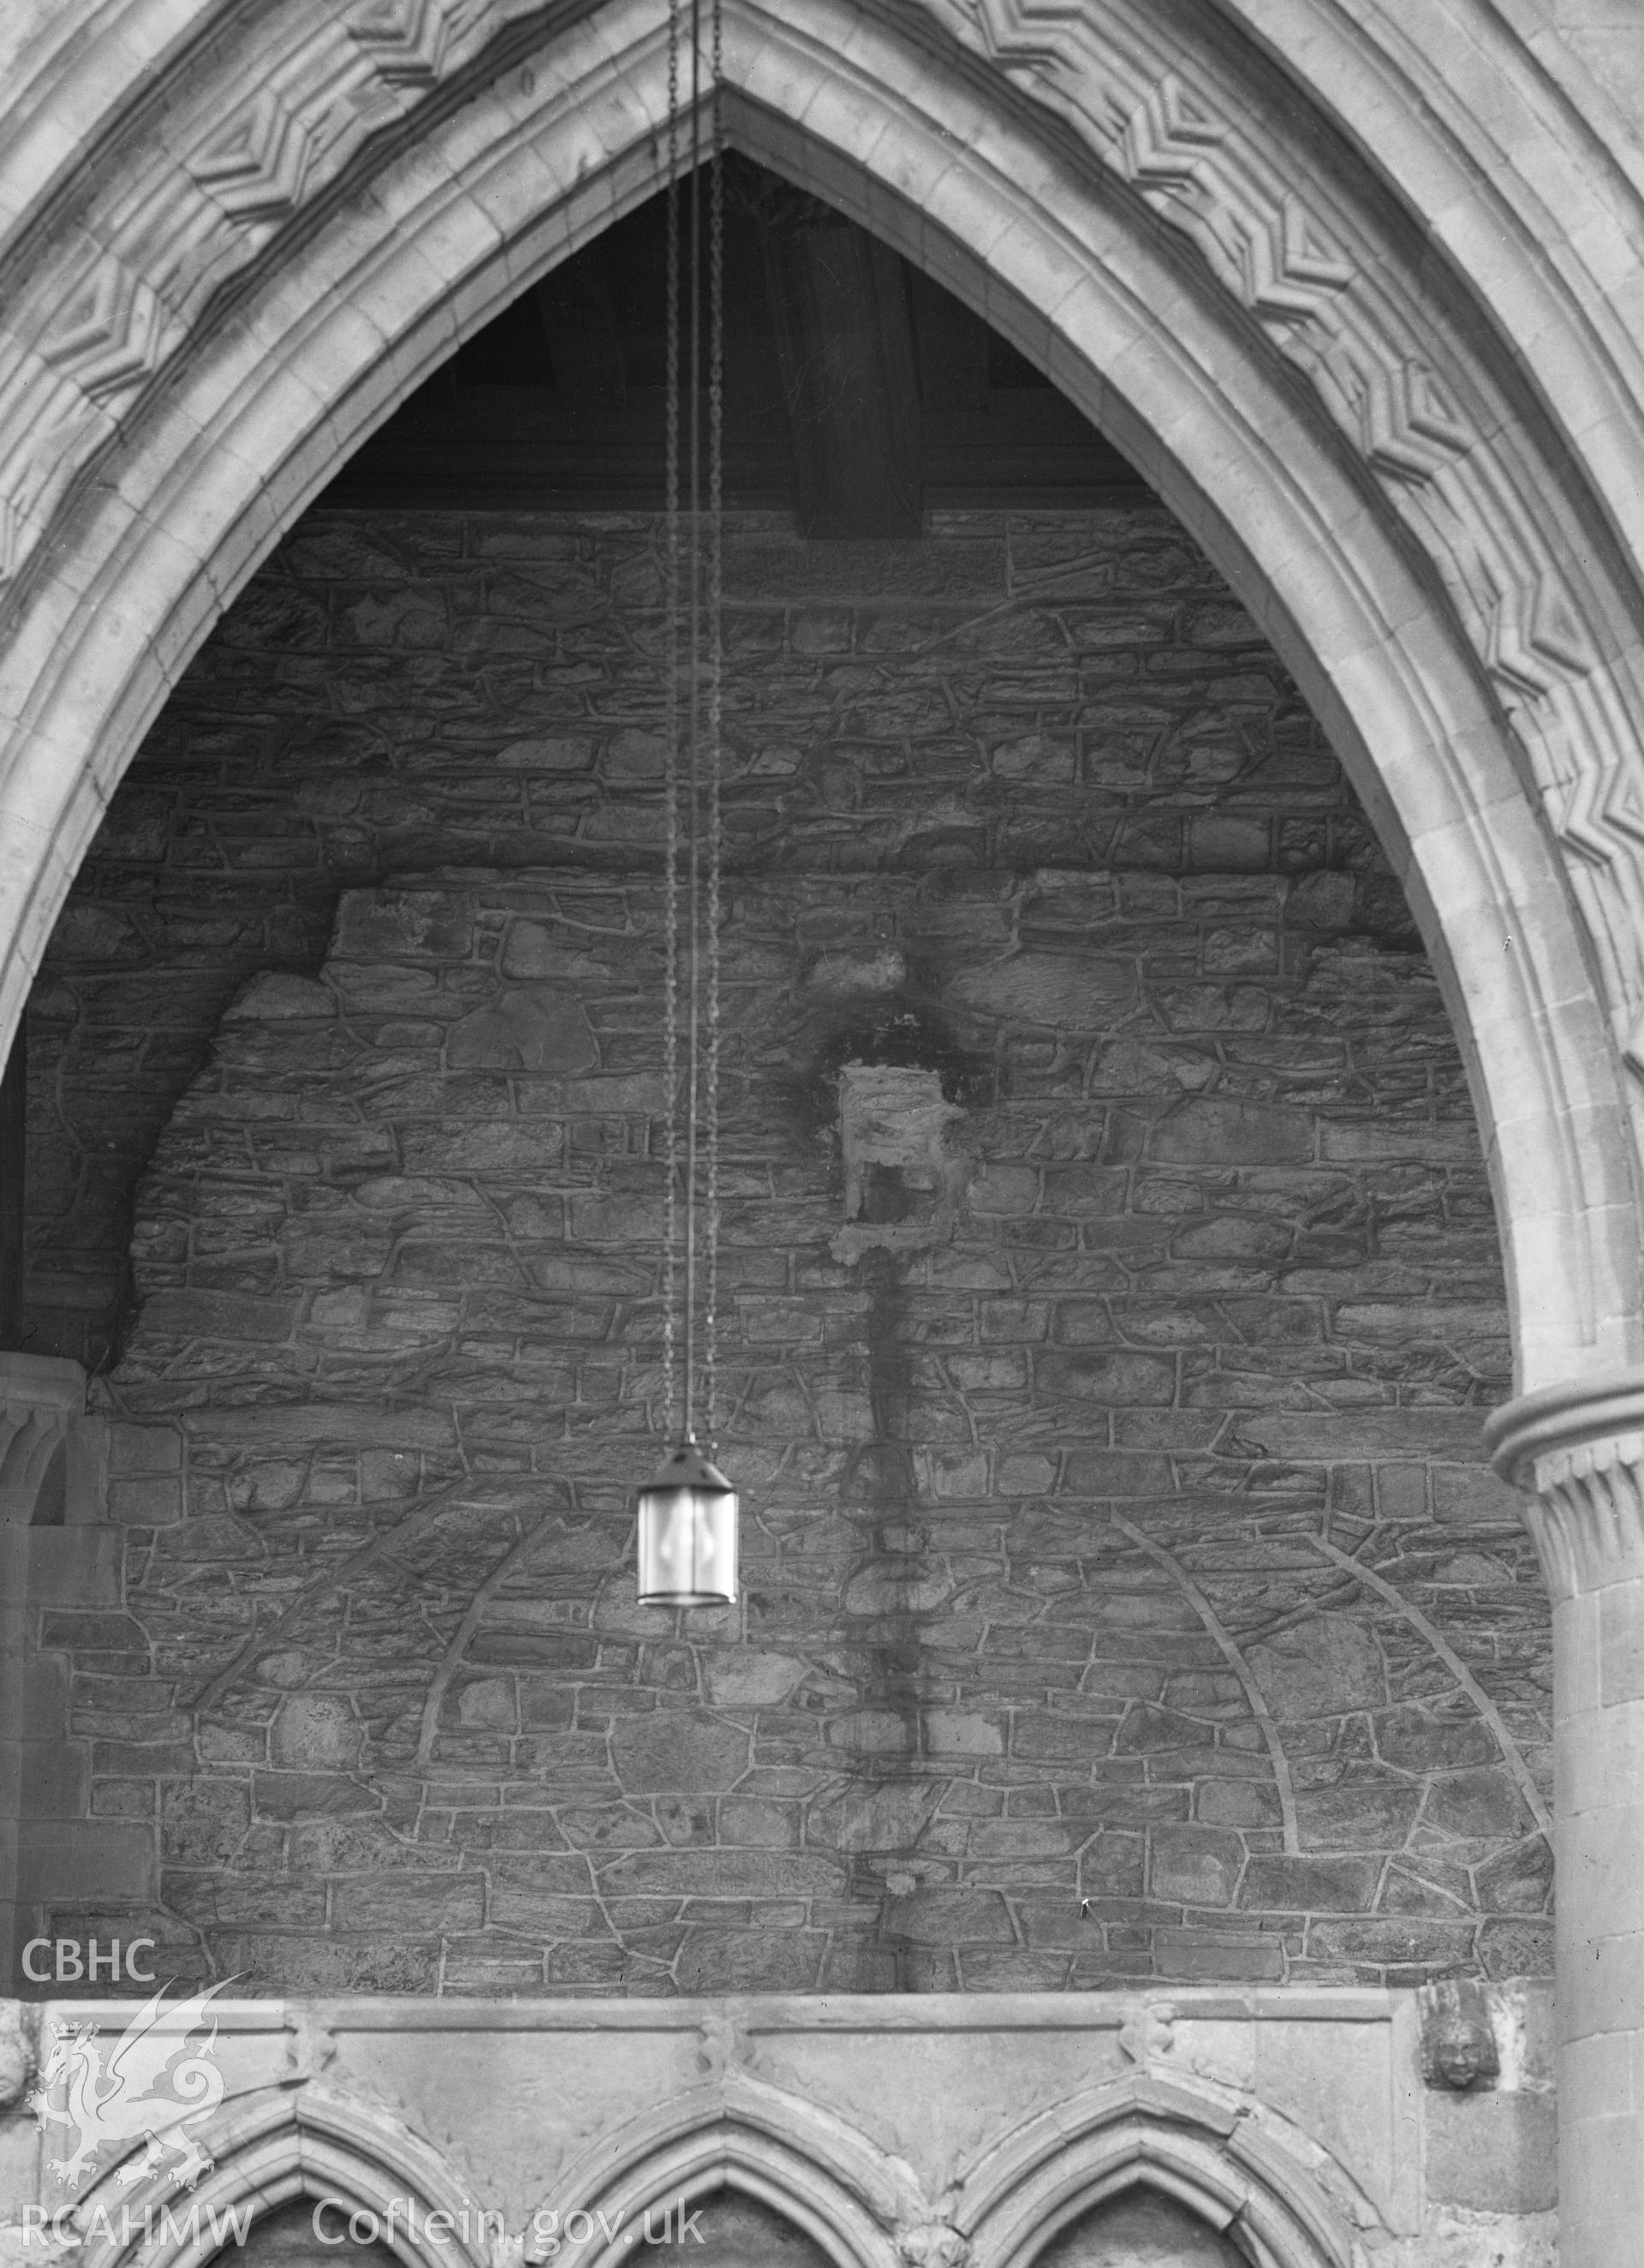 Digital copy of a black and white nitrate negative showing interior view of archway at St. David's Cathedral, taken by E.W. Lovegrove, July 1936.